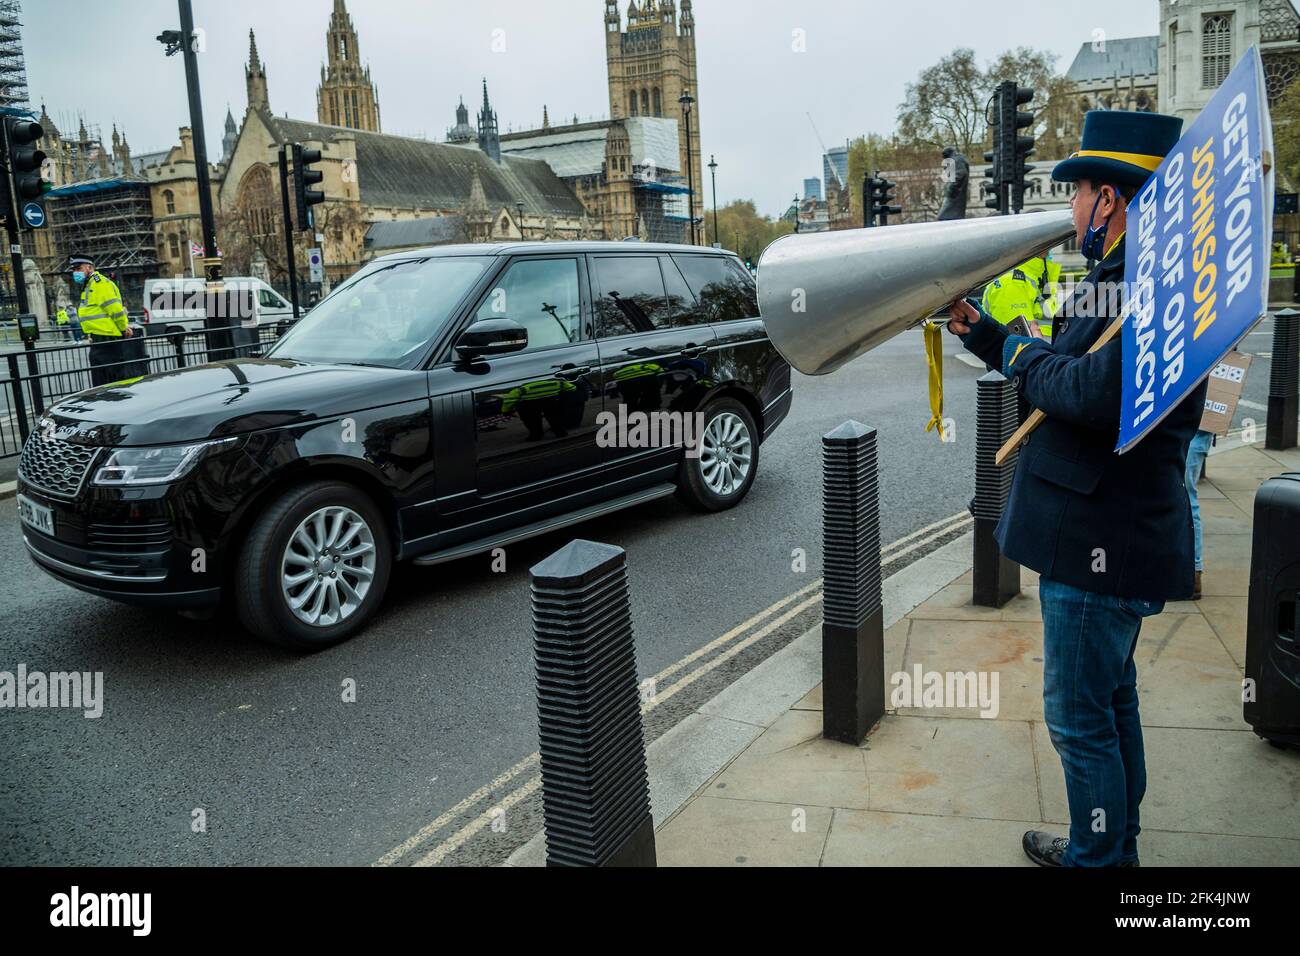 London, UK. 28th Apr, 2021. Heckling a ministerial car as it passes - Steve Bray of Sodem, pro EU protester, has now switched his attention to Tory 'sleaze' - outside Parliament after Prime Ministers Questions. Credit: Guy Bell/Alamy Live News Stock Photo